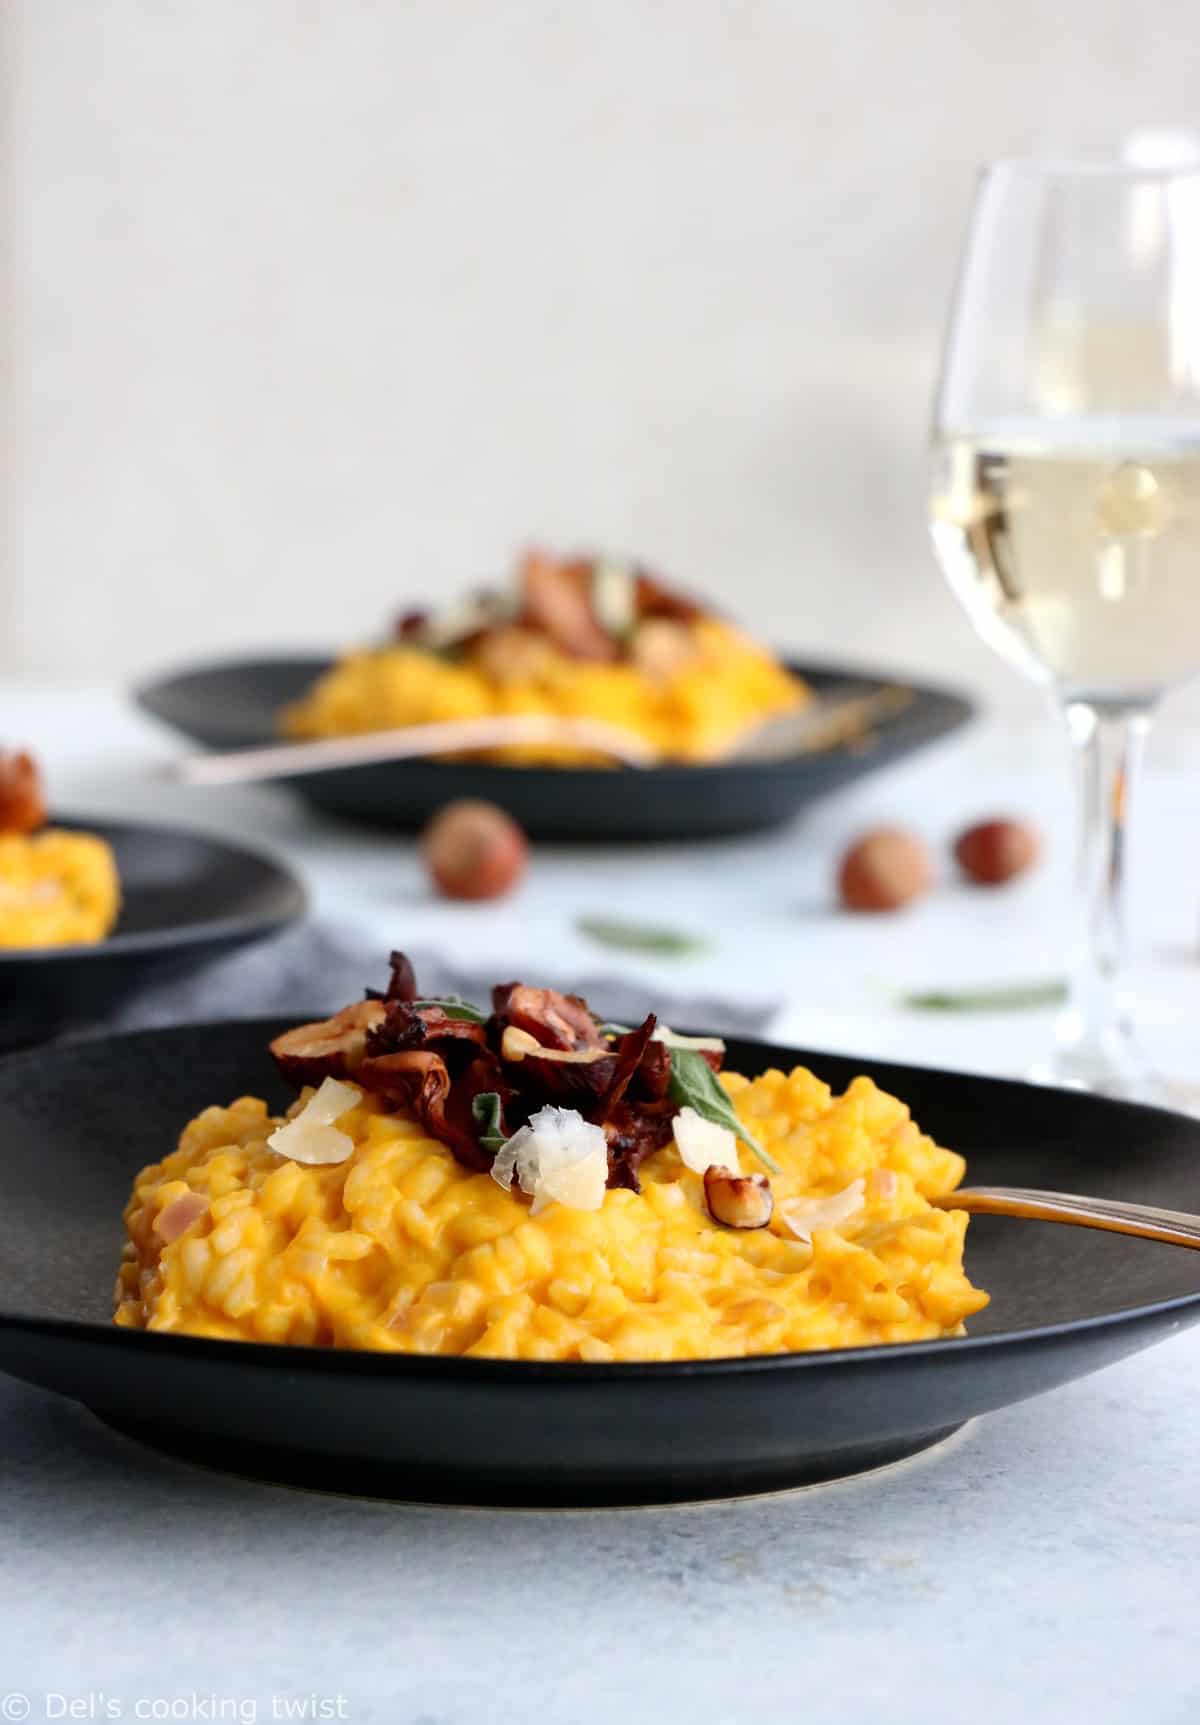 Butternut squash risotto is easy to prepare and packed with warm, hearty and cozy fall flavors. Serve it as is with sage for an everyday meal or top it with sautéed chanterelles mushrooms, toasted hazelnuts, and you get a fancy dish for Thanksgiving or any special occasion.